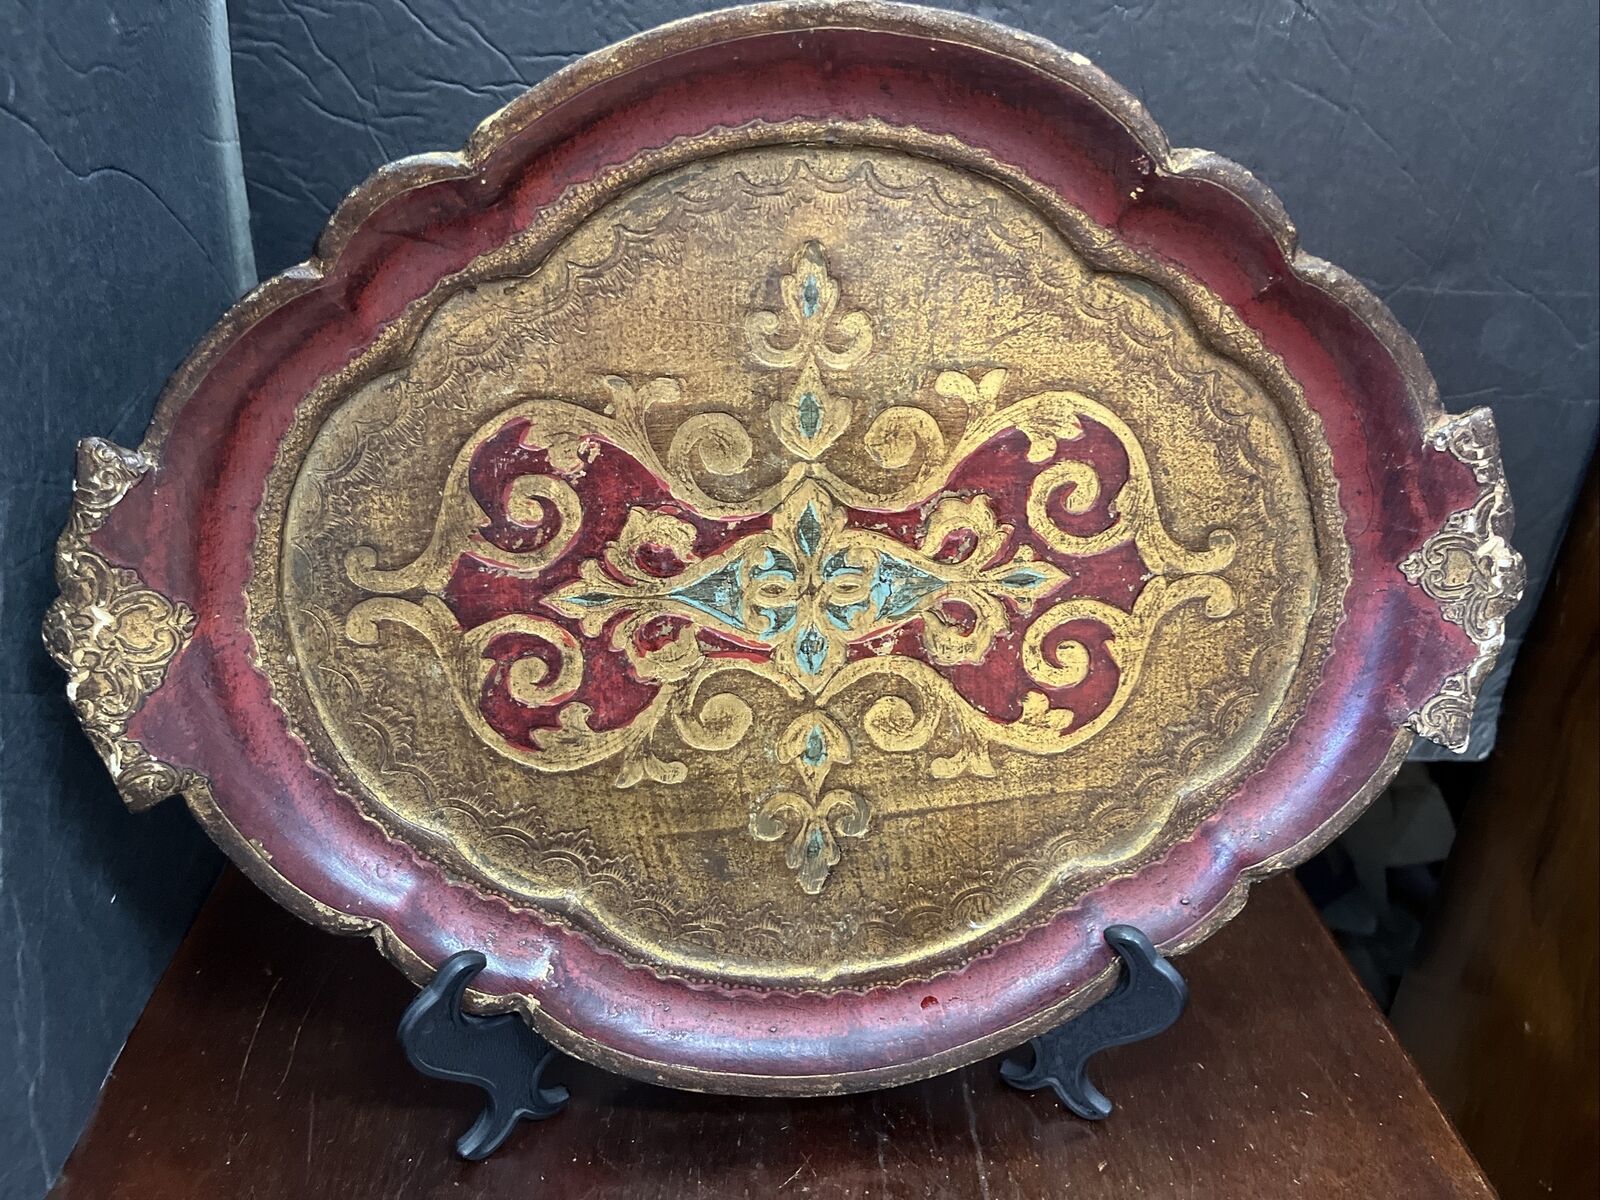 Vintage Italian Florentine Gilded Wood Toleware Serving Tray Platter  Italy 